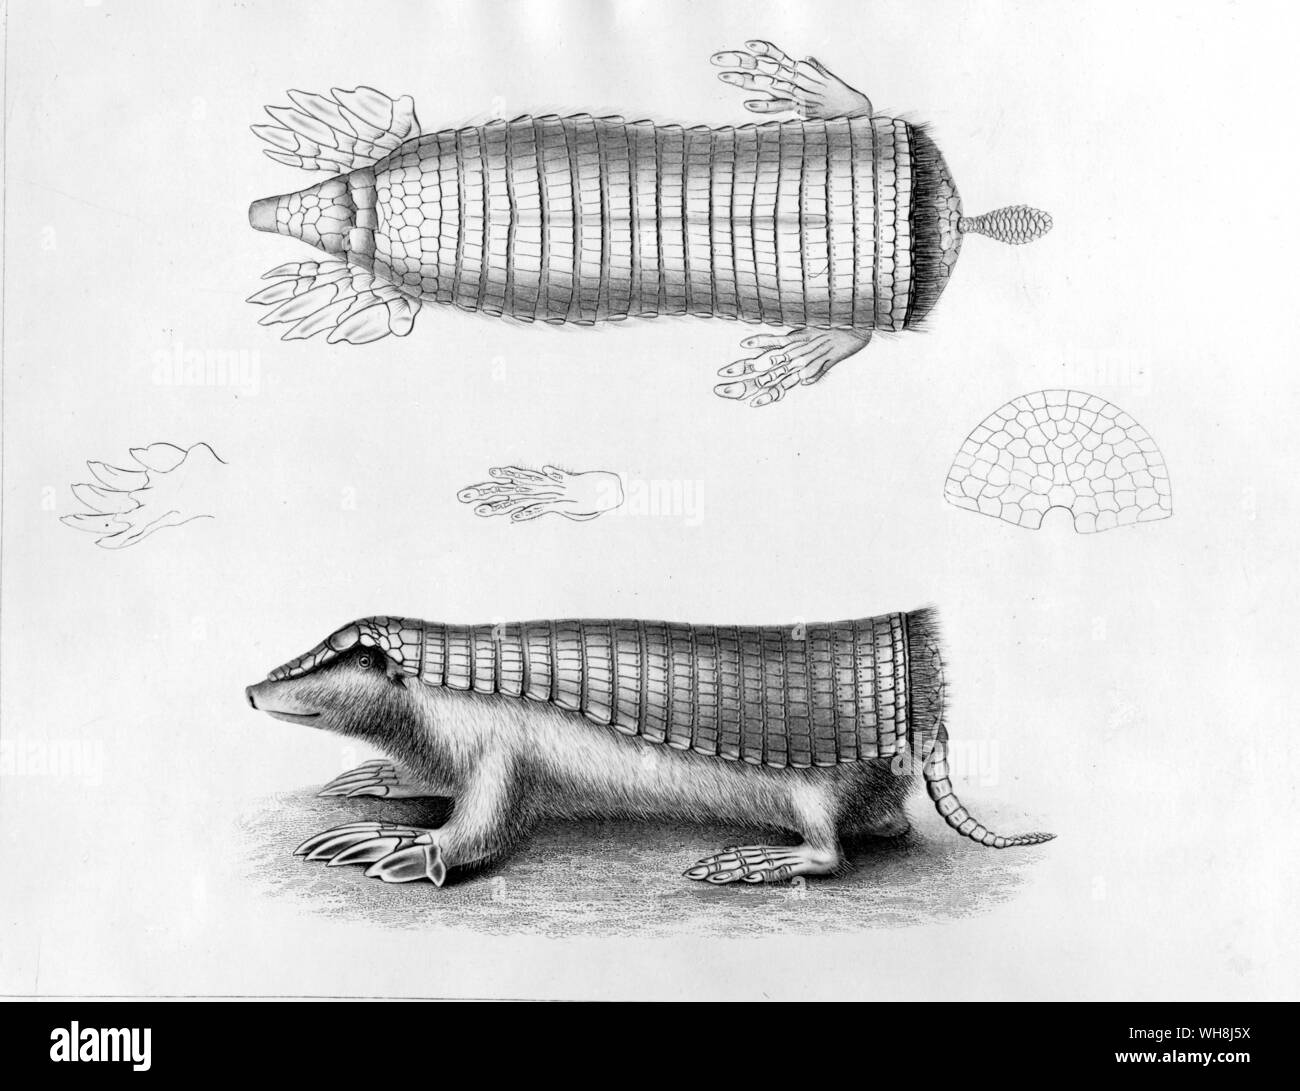 The Pichiciego, a species of armadillo. 'The instant one was perceived, it was necessary, in order to catch it, almost to tumble off one's horse. for in soft soil the animal burrowed so quickly, that its hinder quarters would almost disappear before one could alight.' Darwin and the Beagle by Alan Moorhead, page 111. Stock Photo